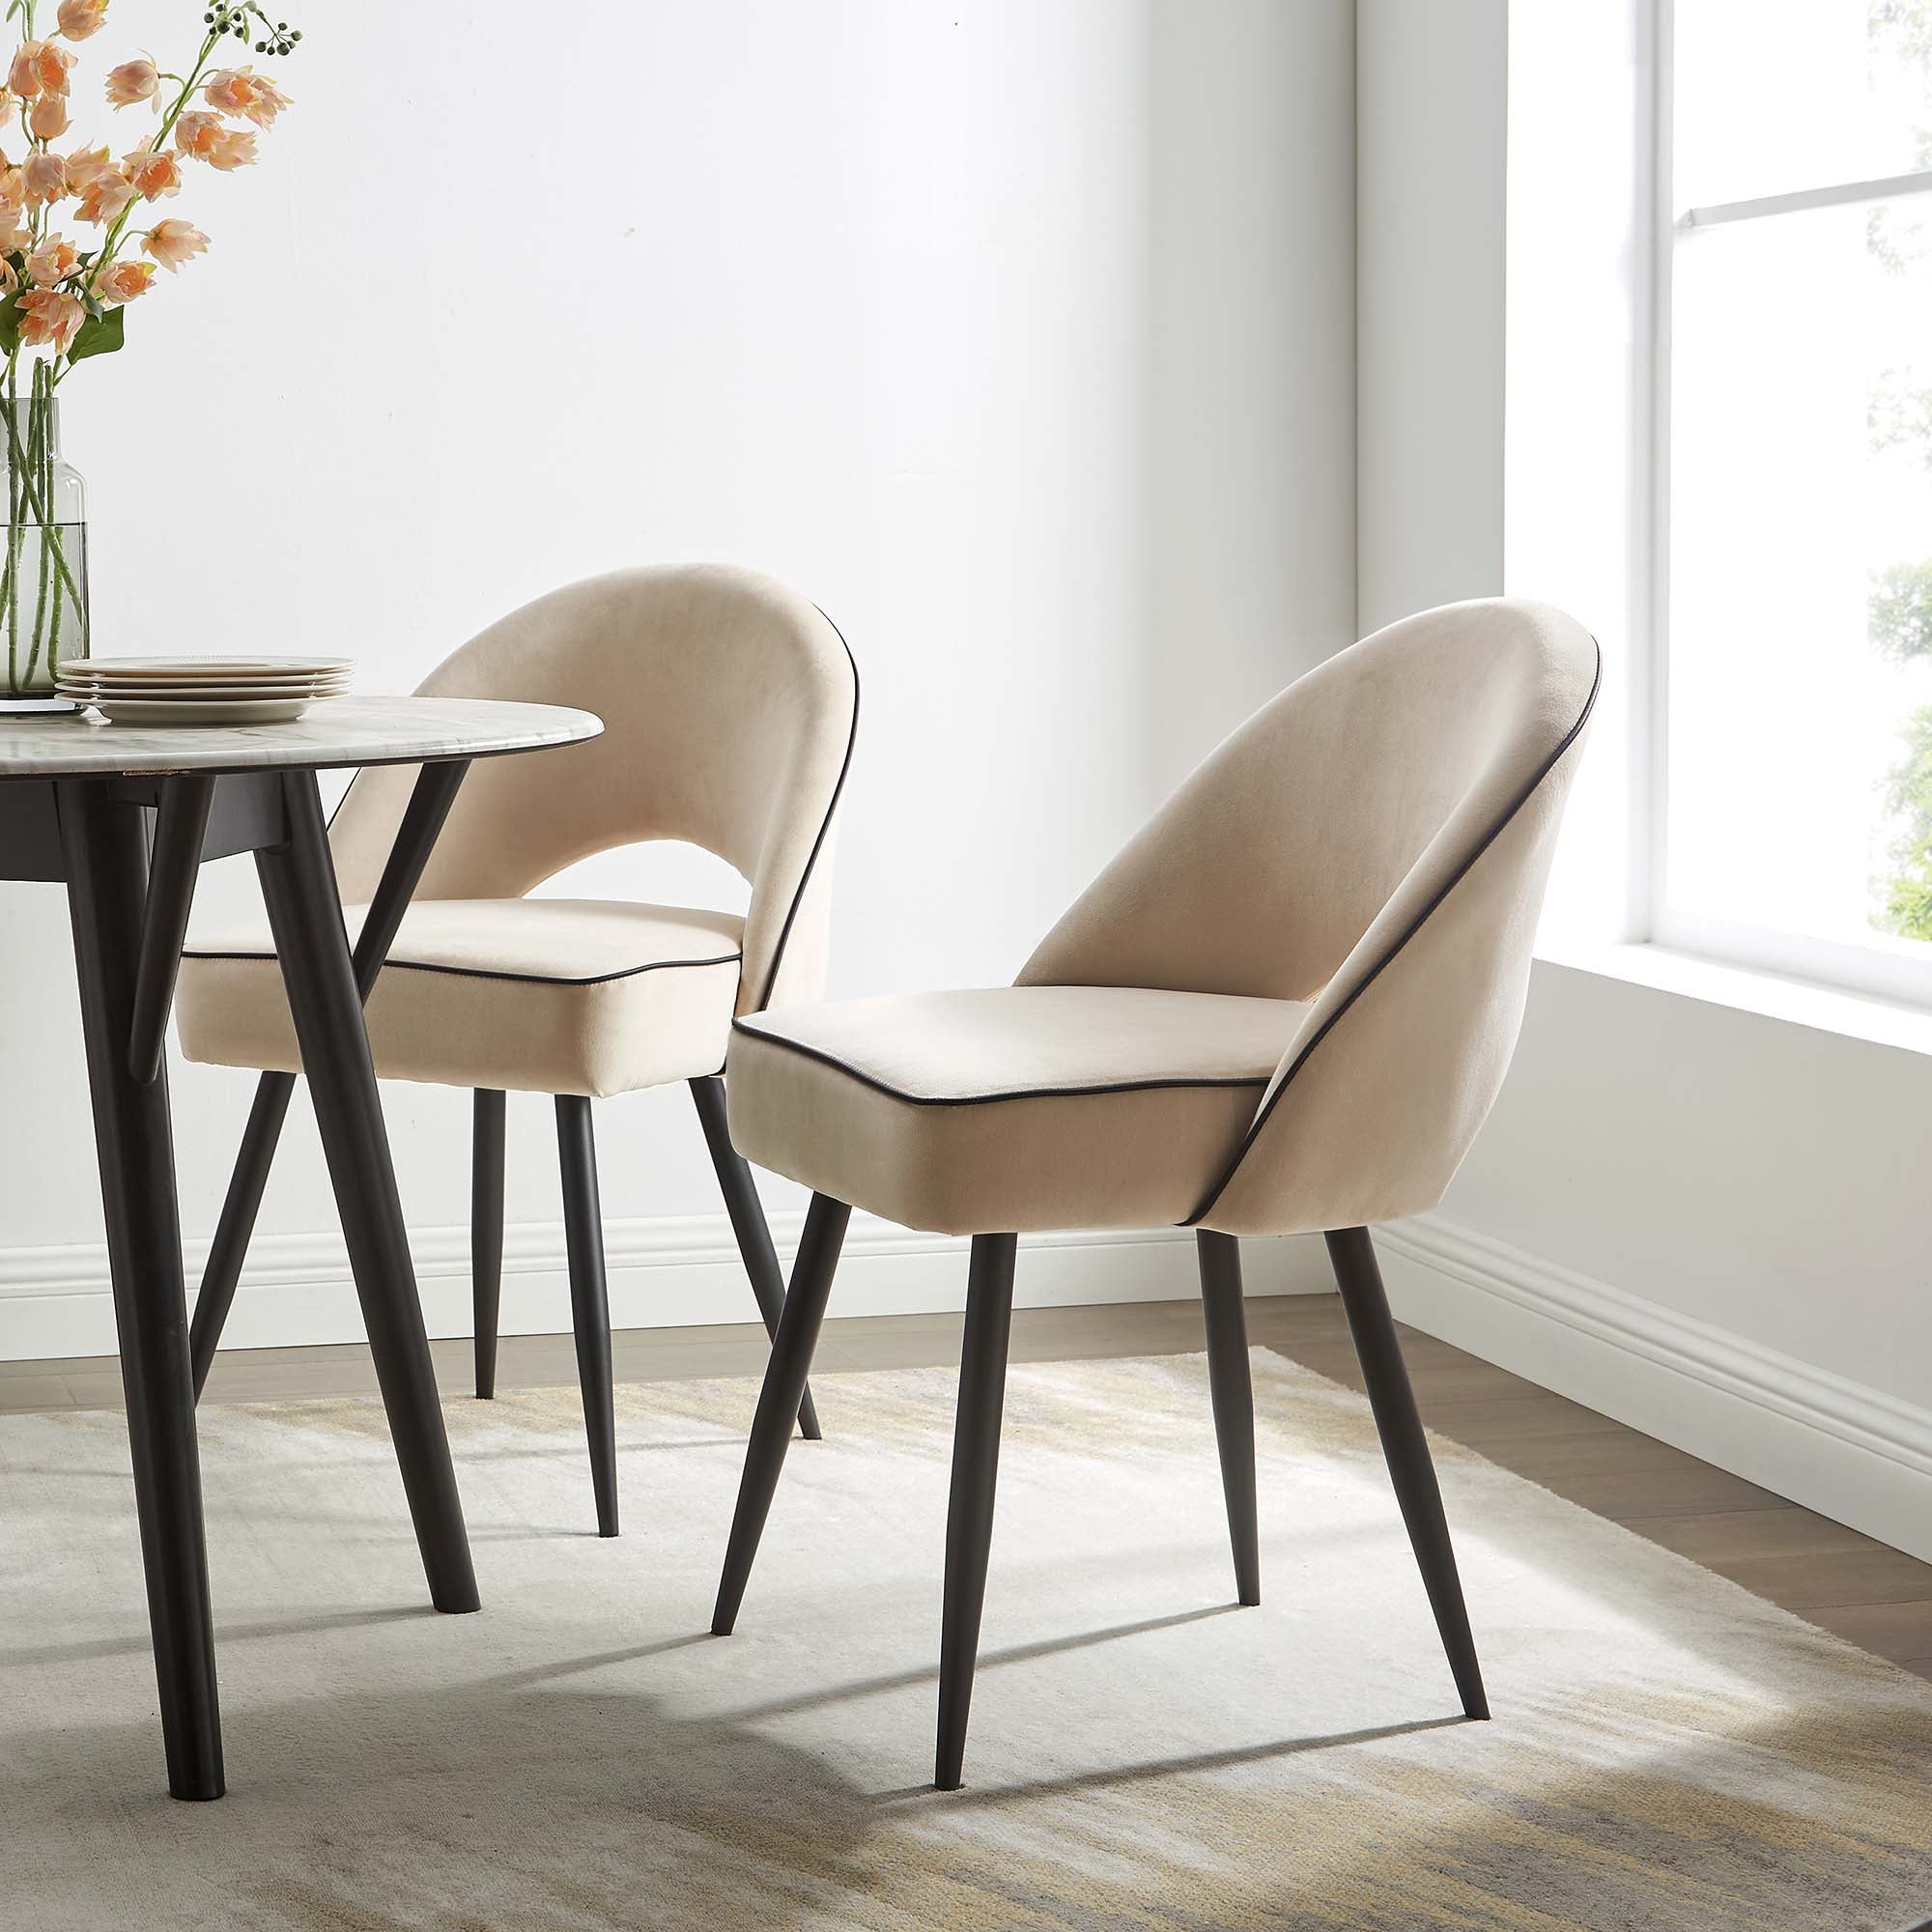 How to choose upholstery for dining chairs